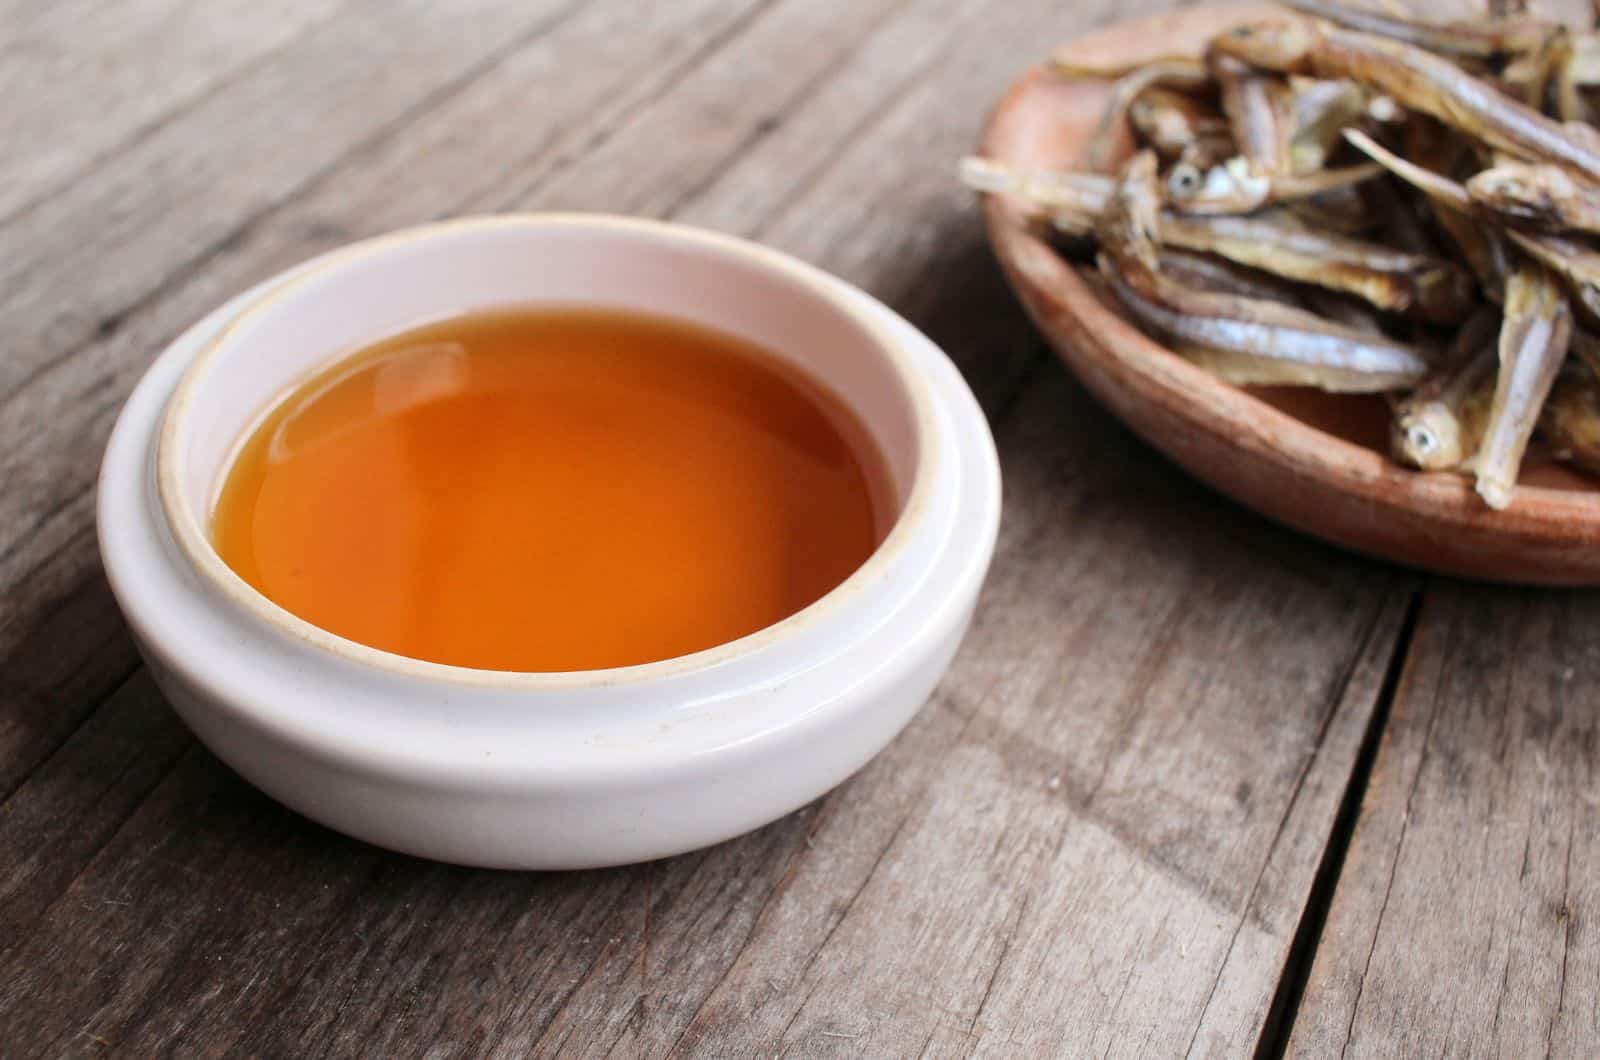 Fish sauce in a white bowl